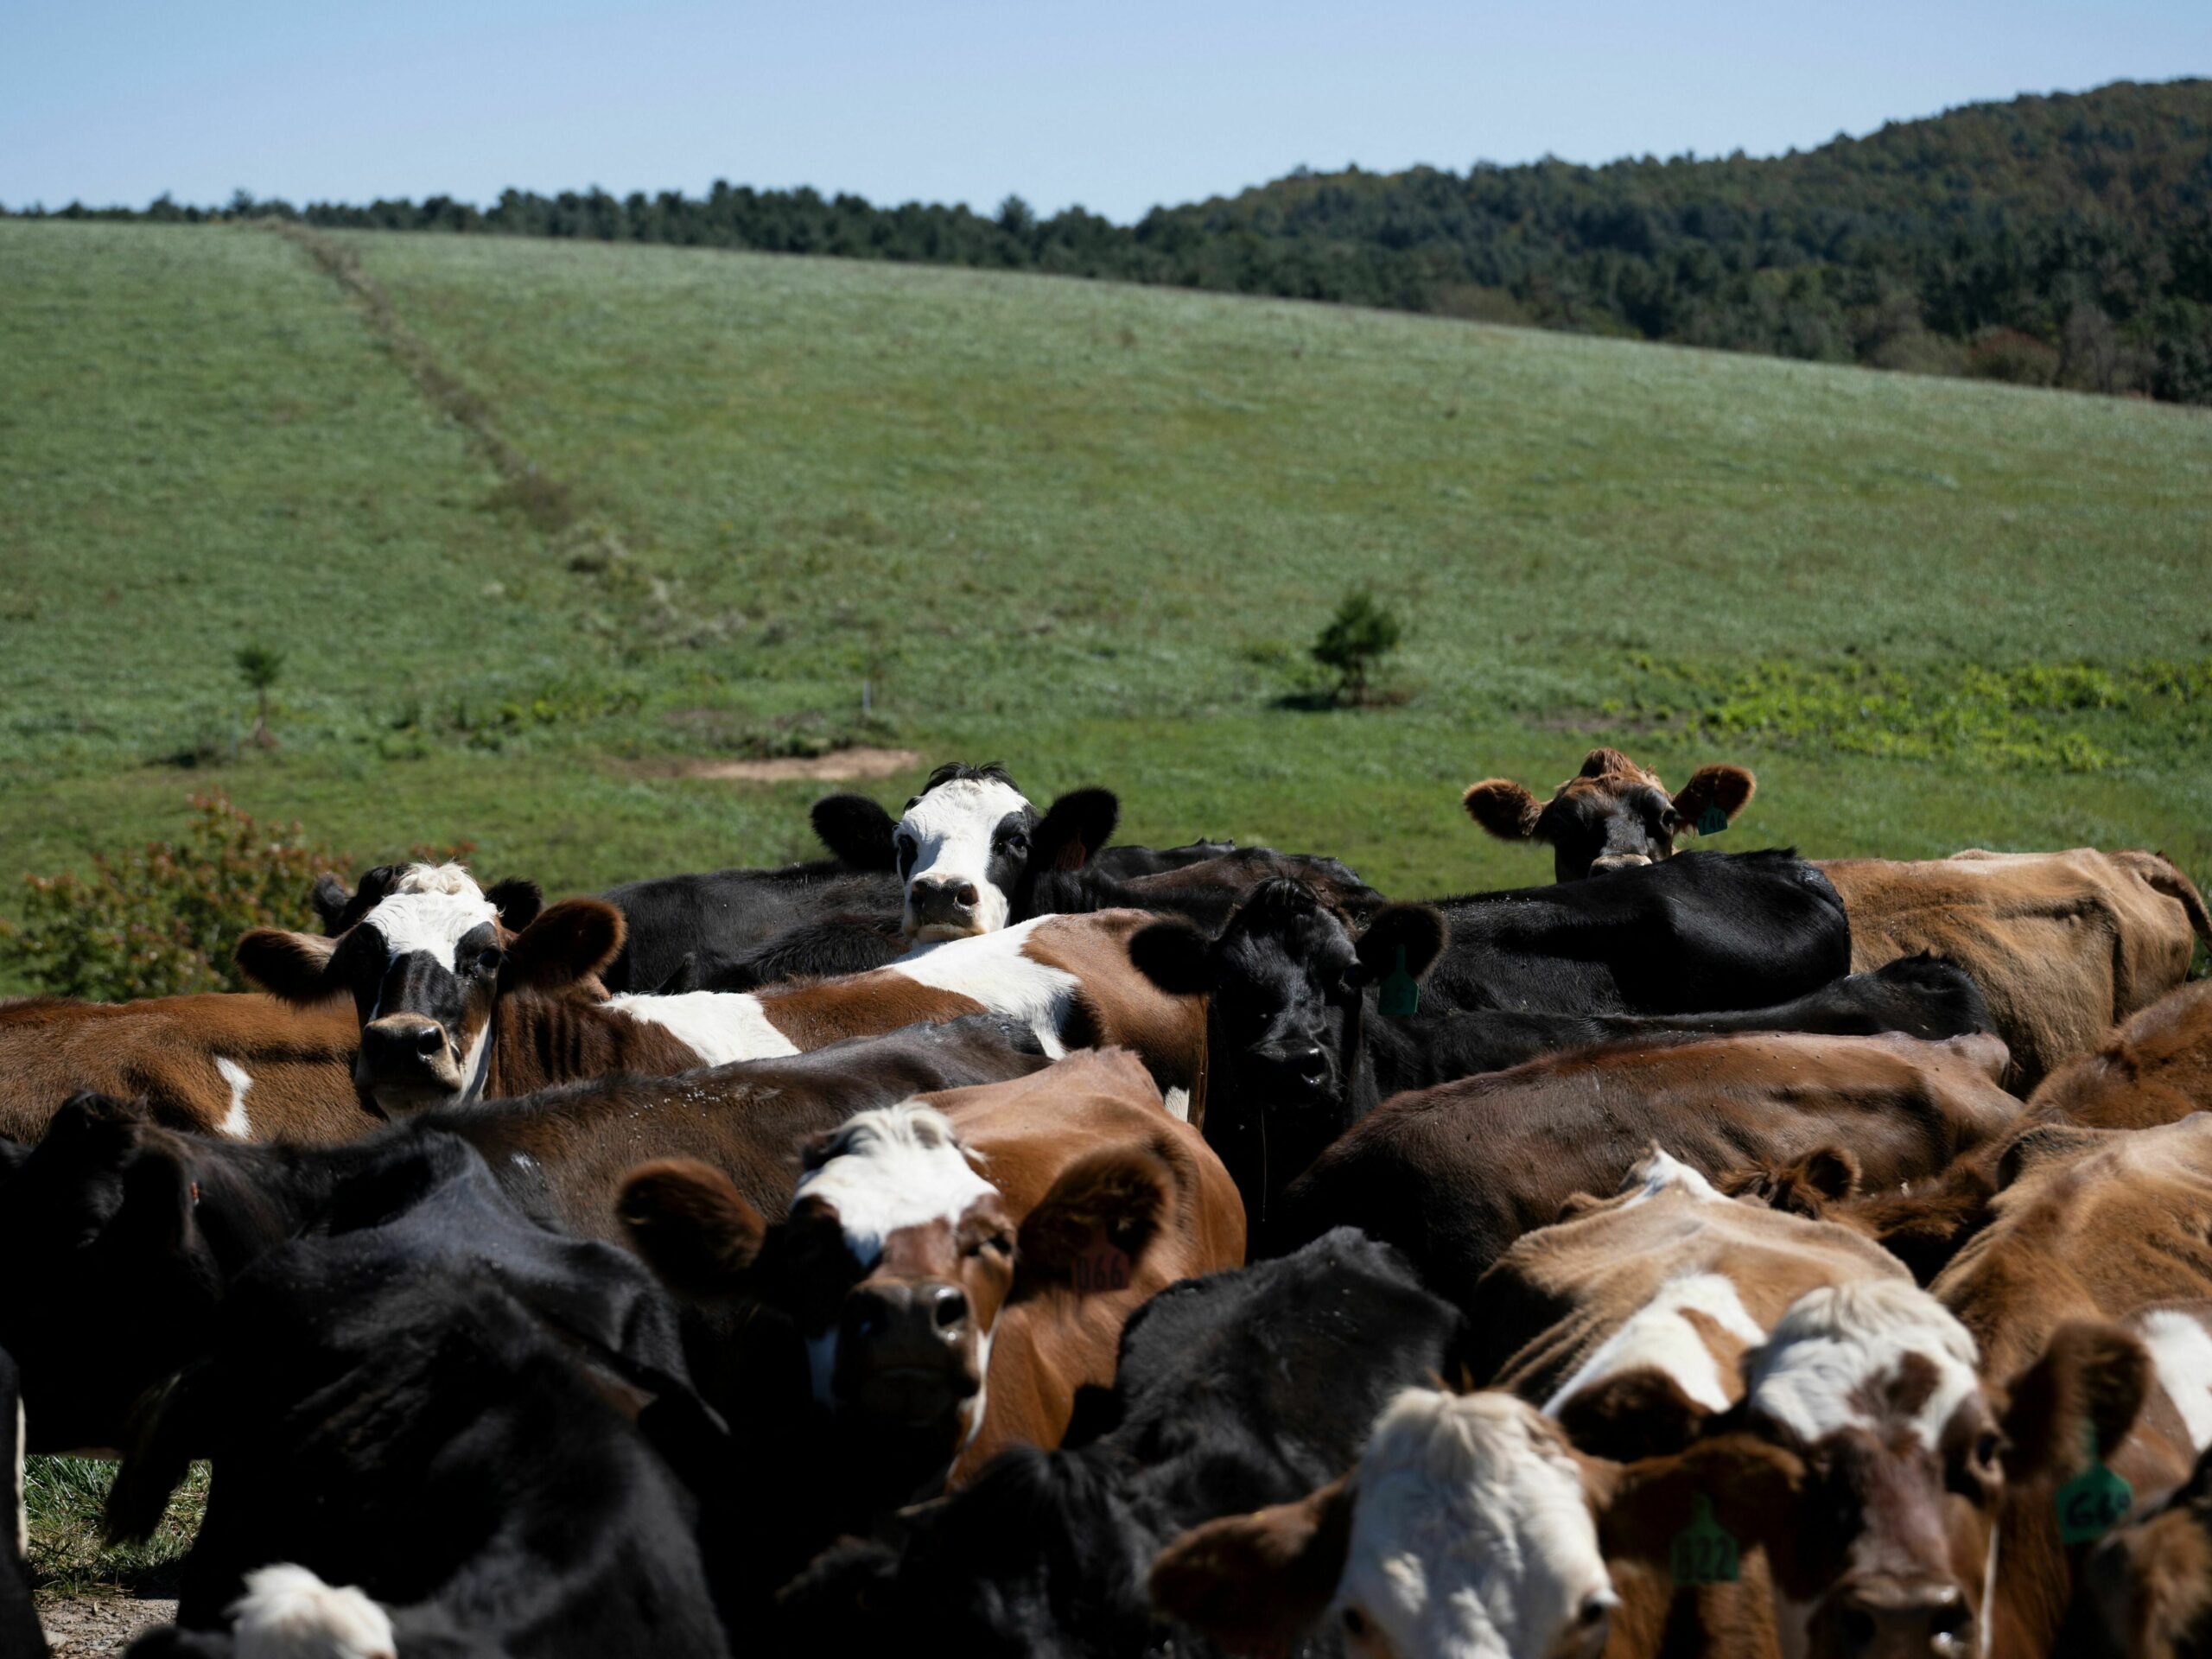 Cows are seen on a dairy farm in Virginia on October 5, 2022.